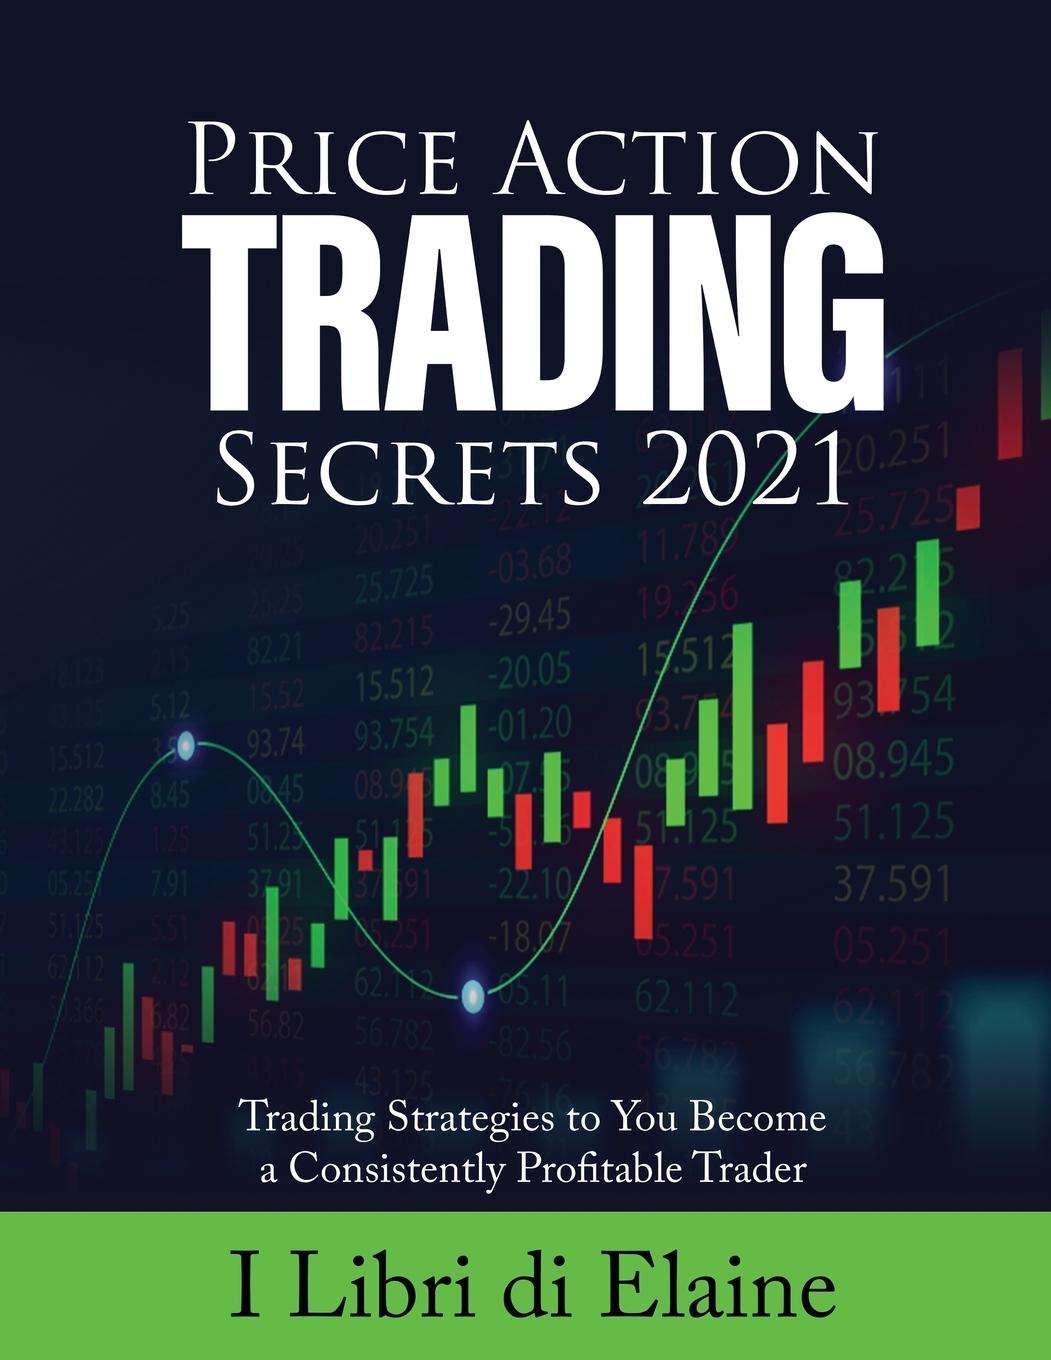 Book Price Action Trading Secrets 2021 